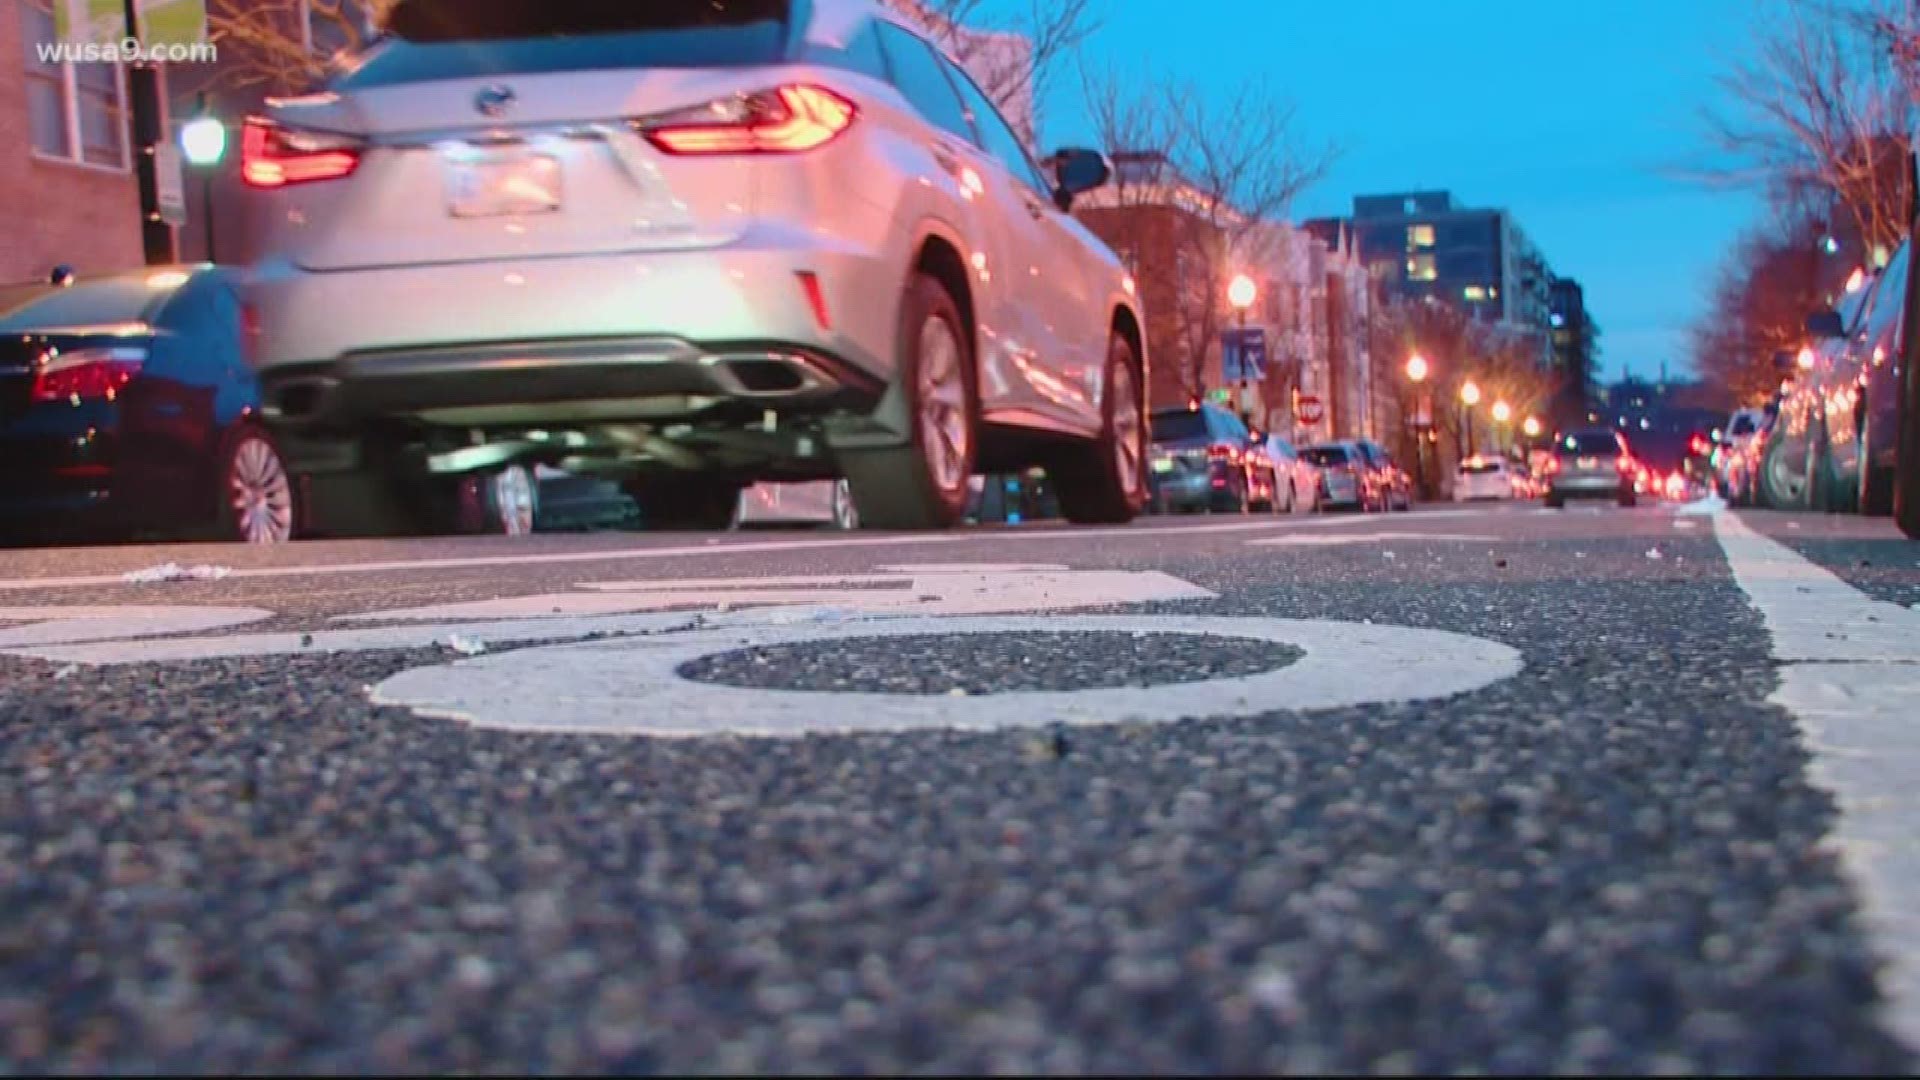 The D.C. Department of Public Works announced Friday that it would start ticketing drivers who block bike lanes in the city.